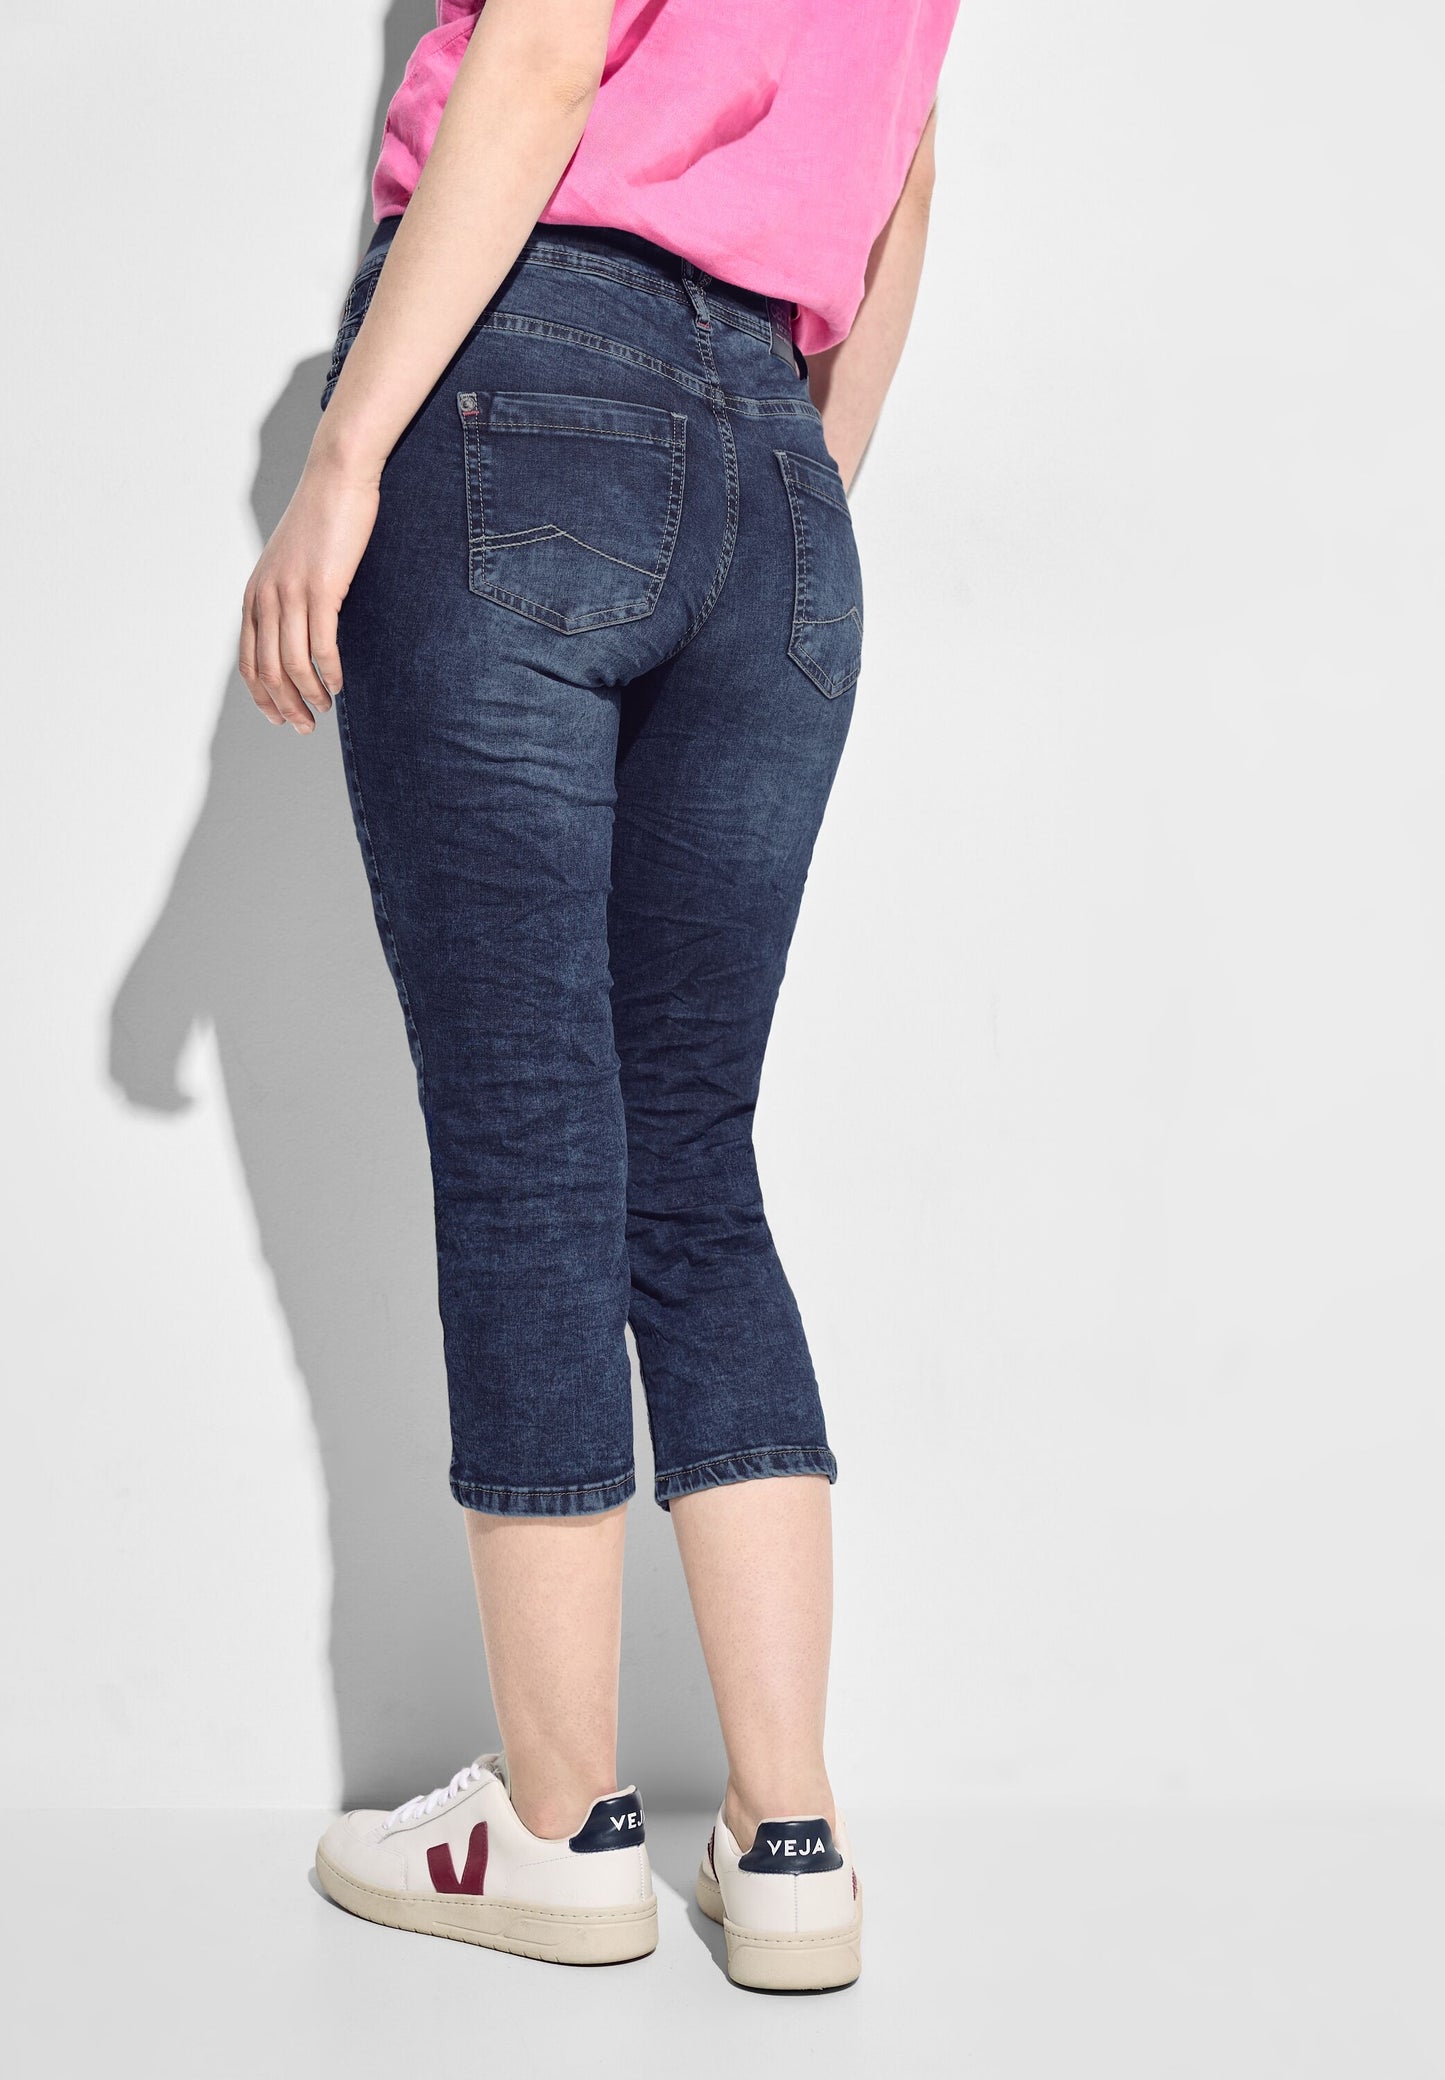 CECIL - 3/4 Casual Fit Jeans - Style Scarlett